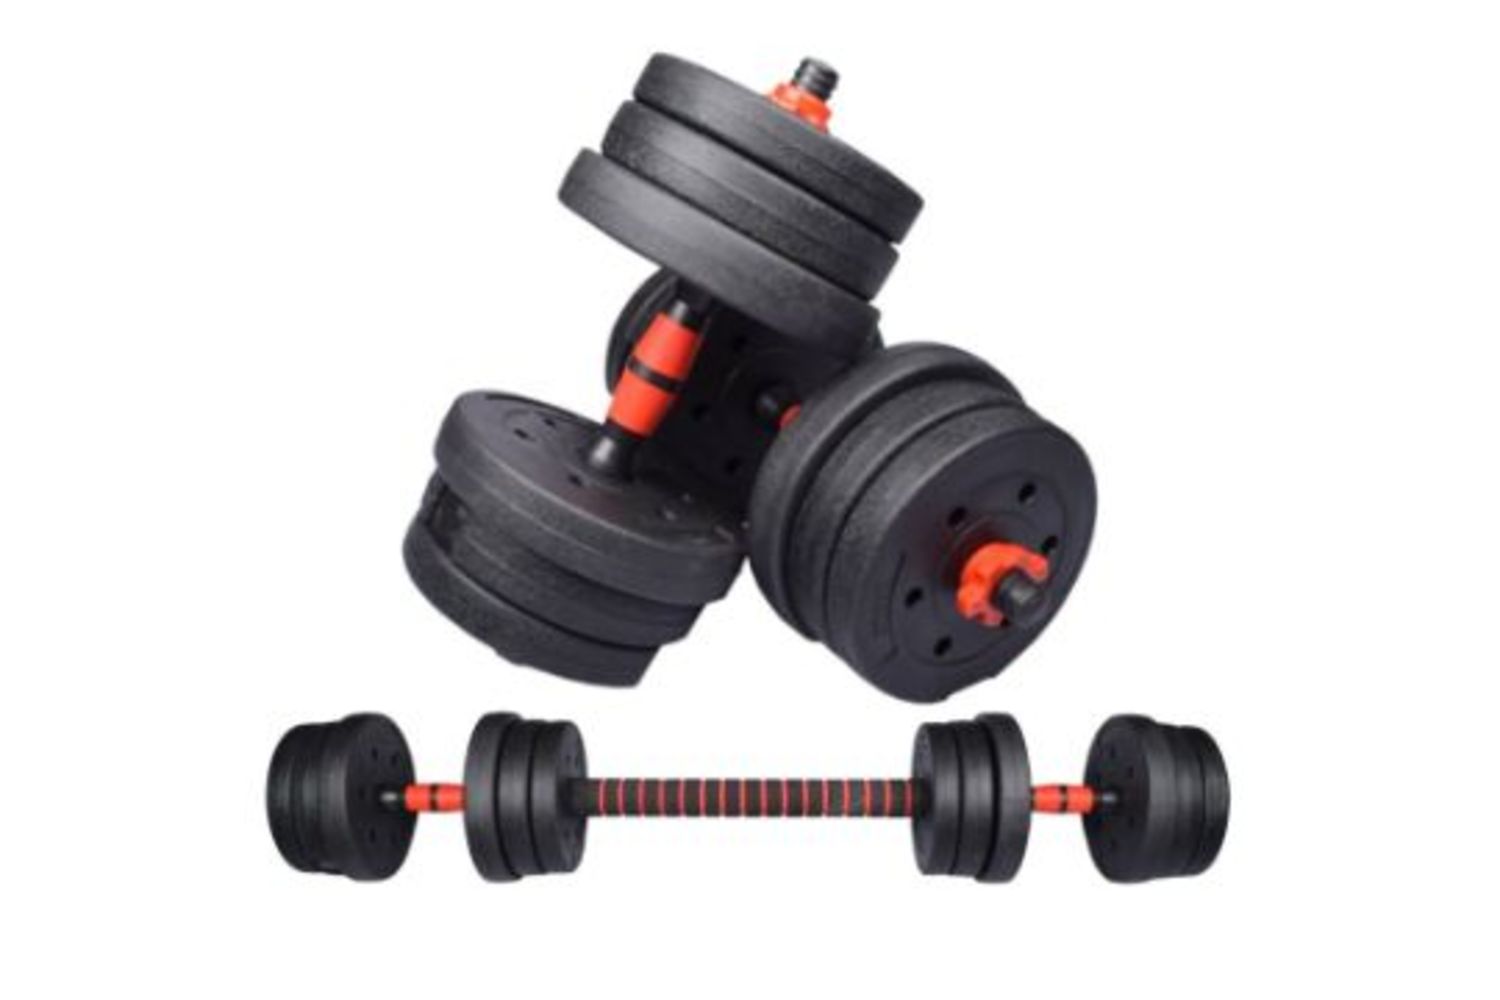 SUMMER SALE ON NEW 30KG ADJUSTABLE 2 IN 1 BARBELL & DUMBBELL WEIGHT SETS!!!! OVER 50% OFF THE RRP!!